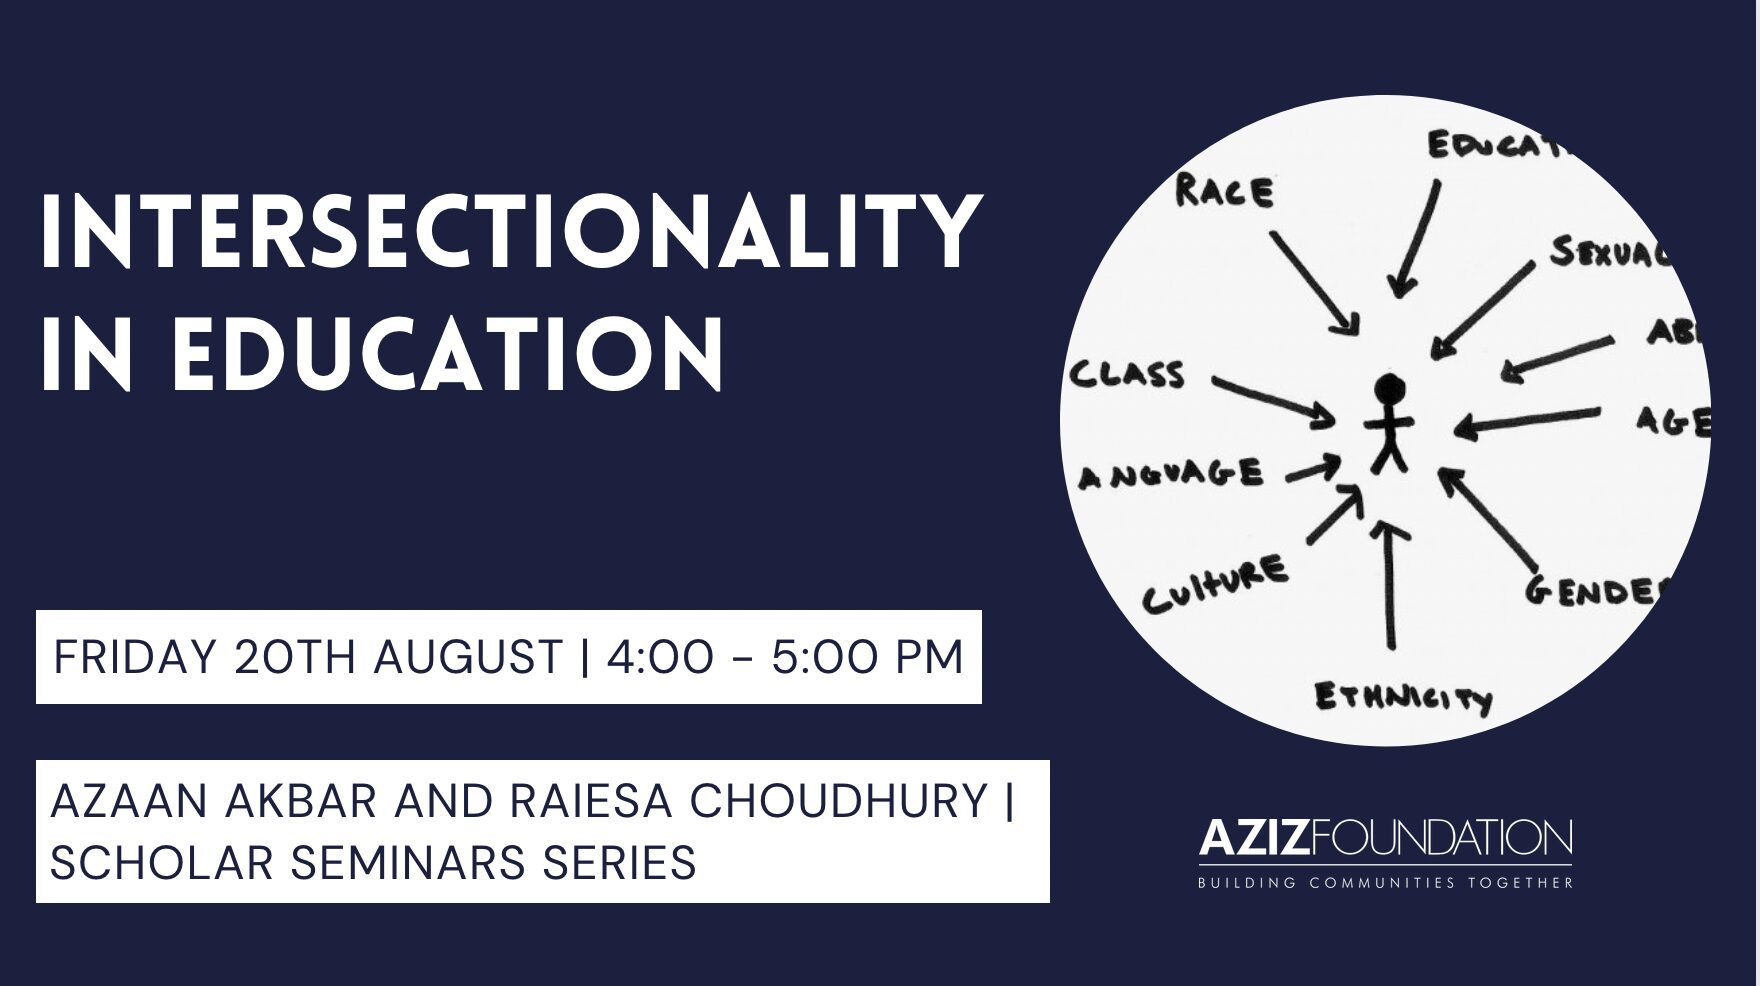 Education and intersectionality webinar